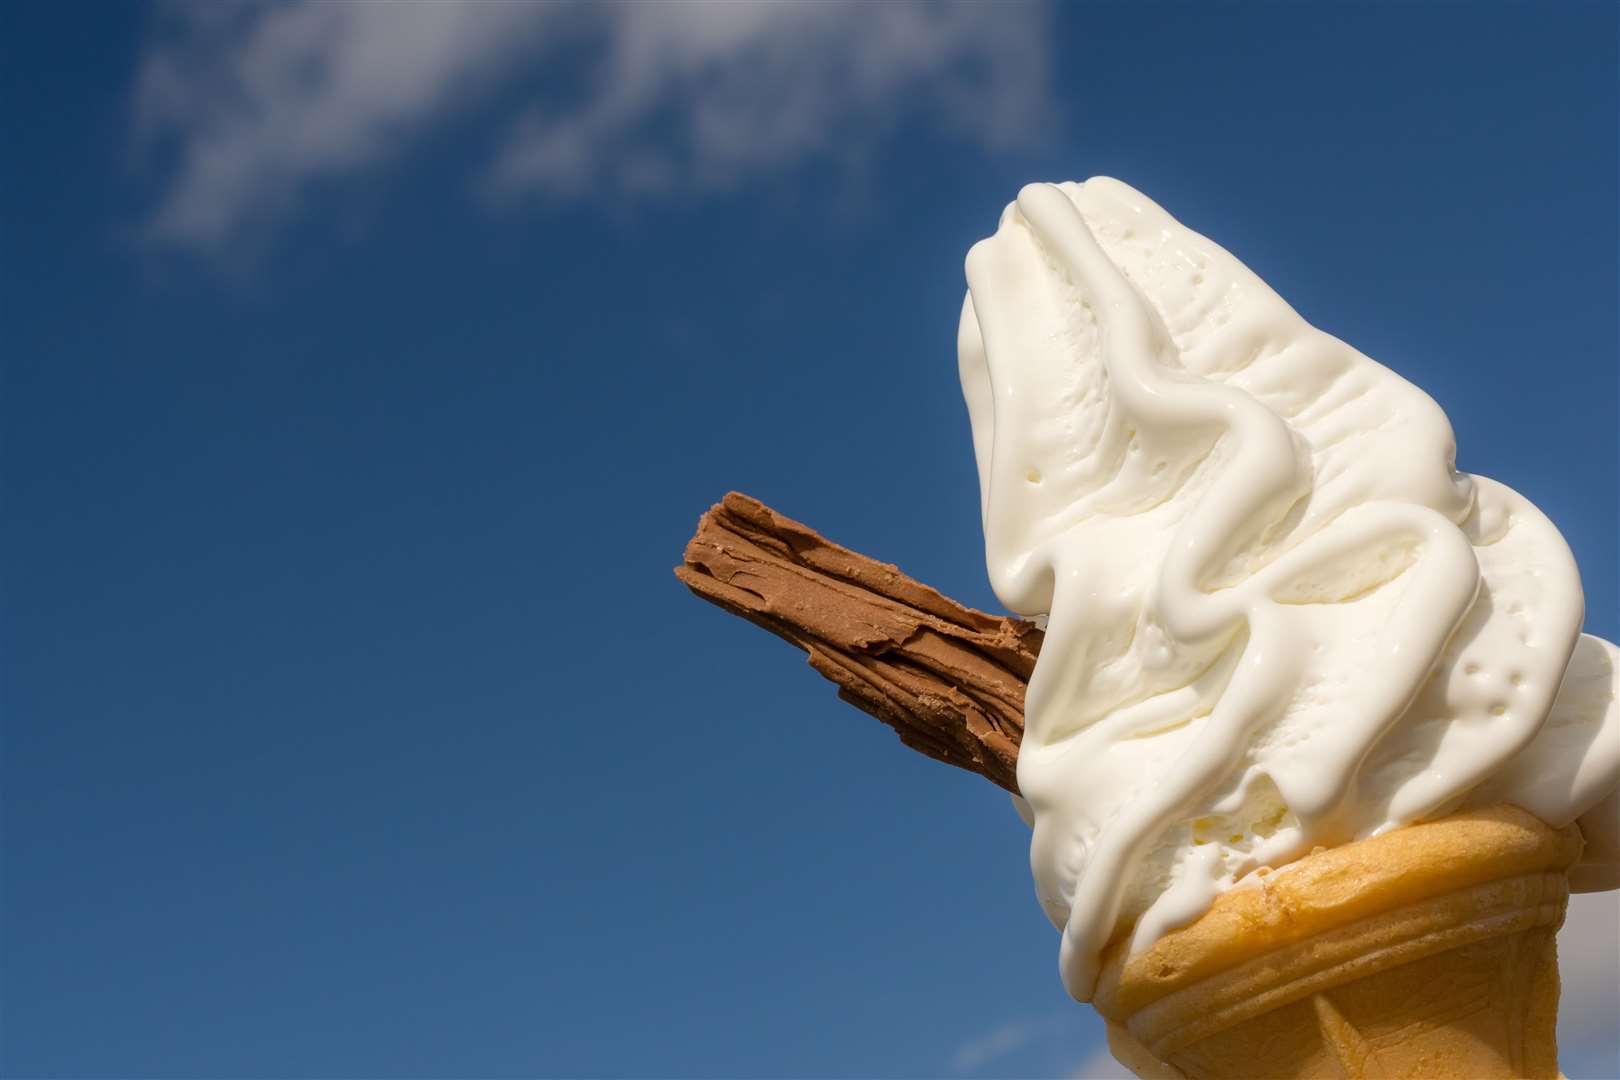 The heat could reach record levels at the weekend so ice creams are likely to be in high demand